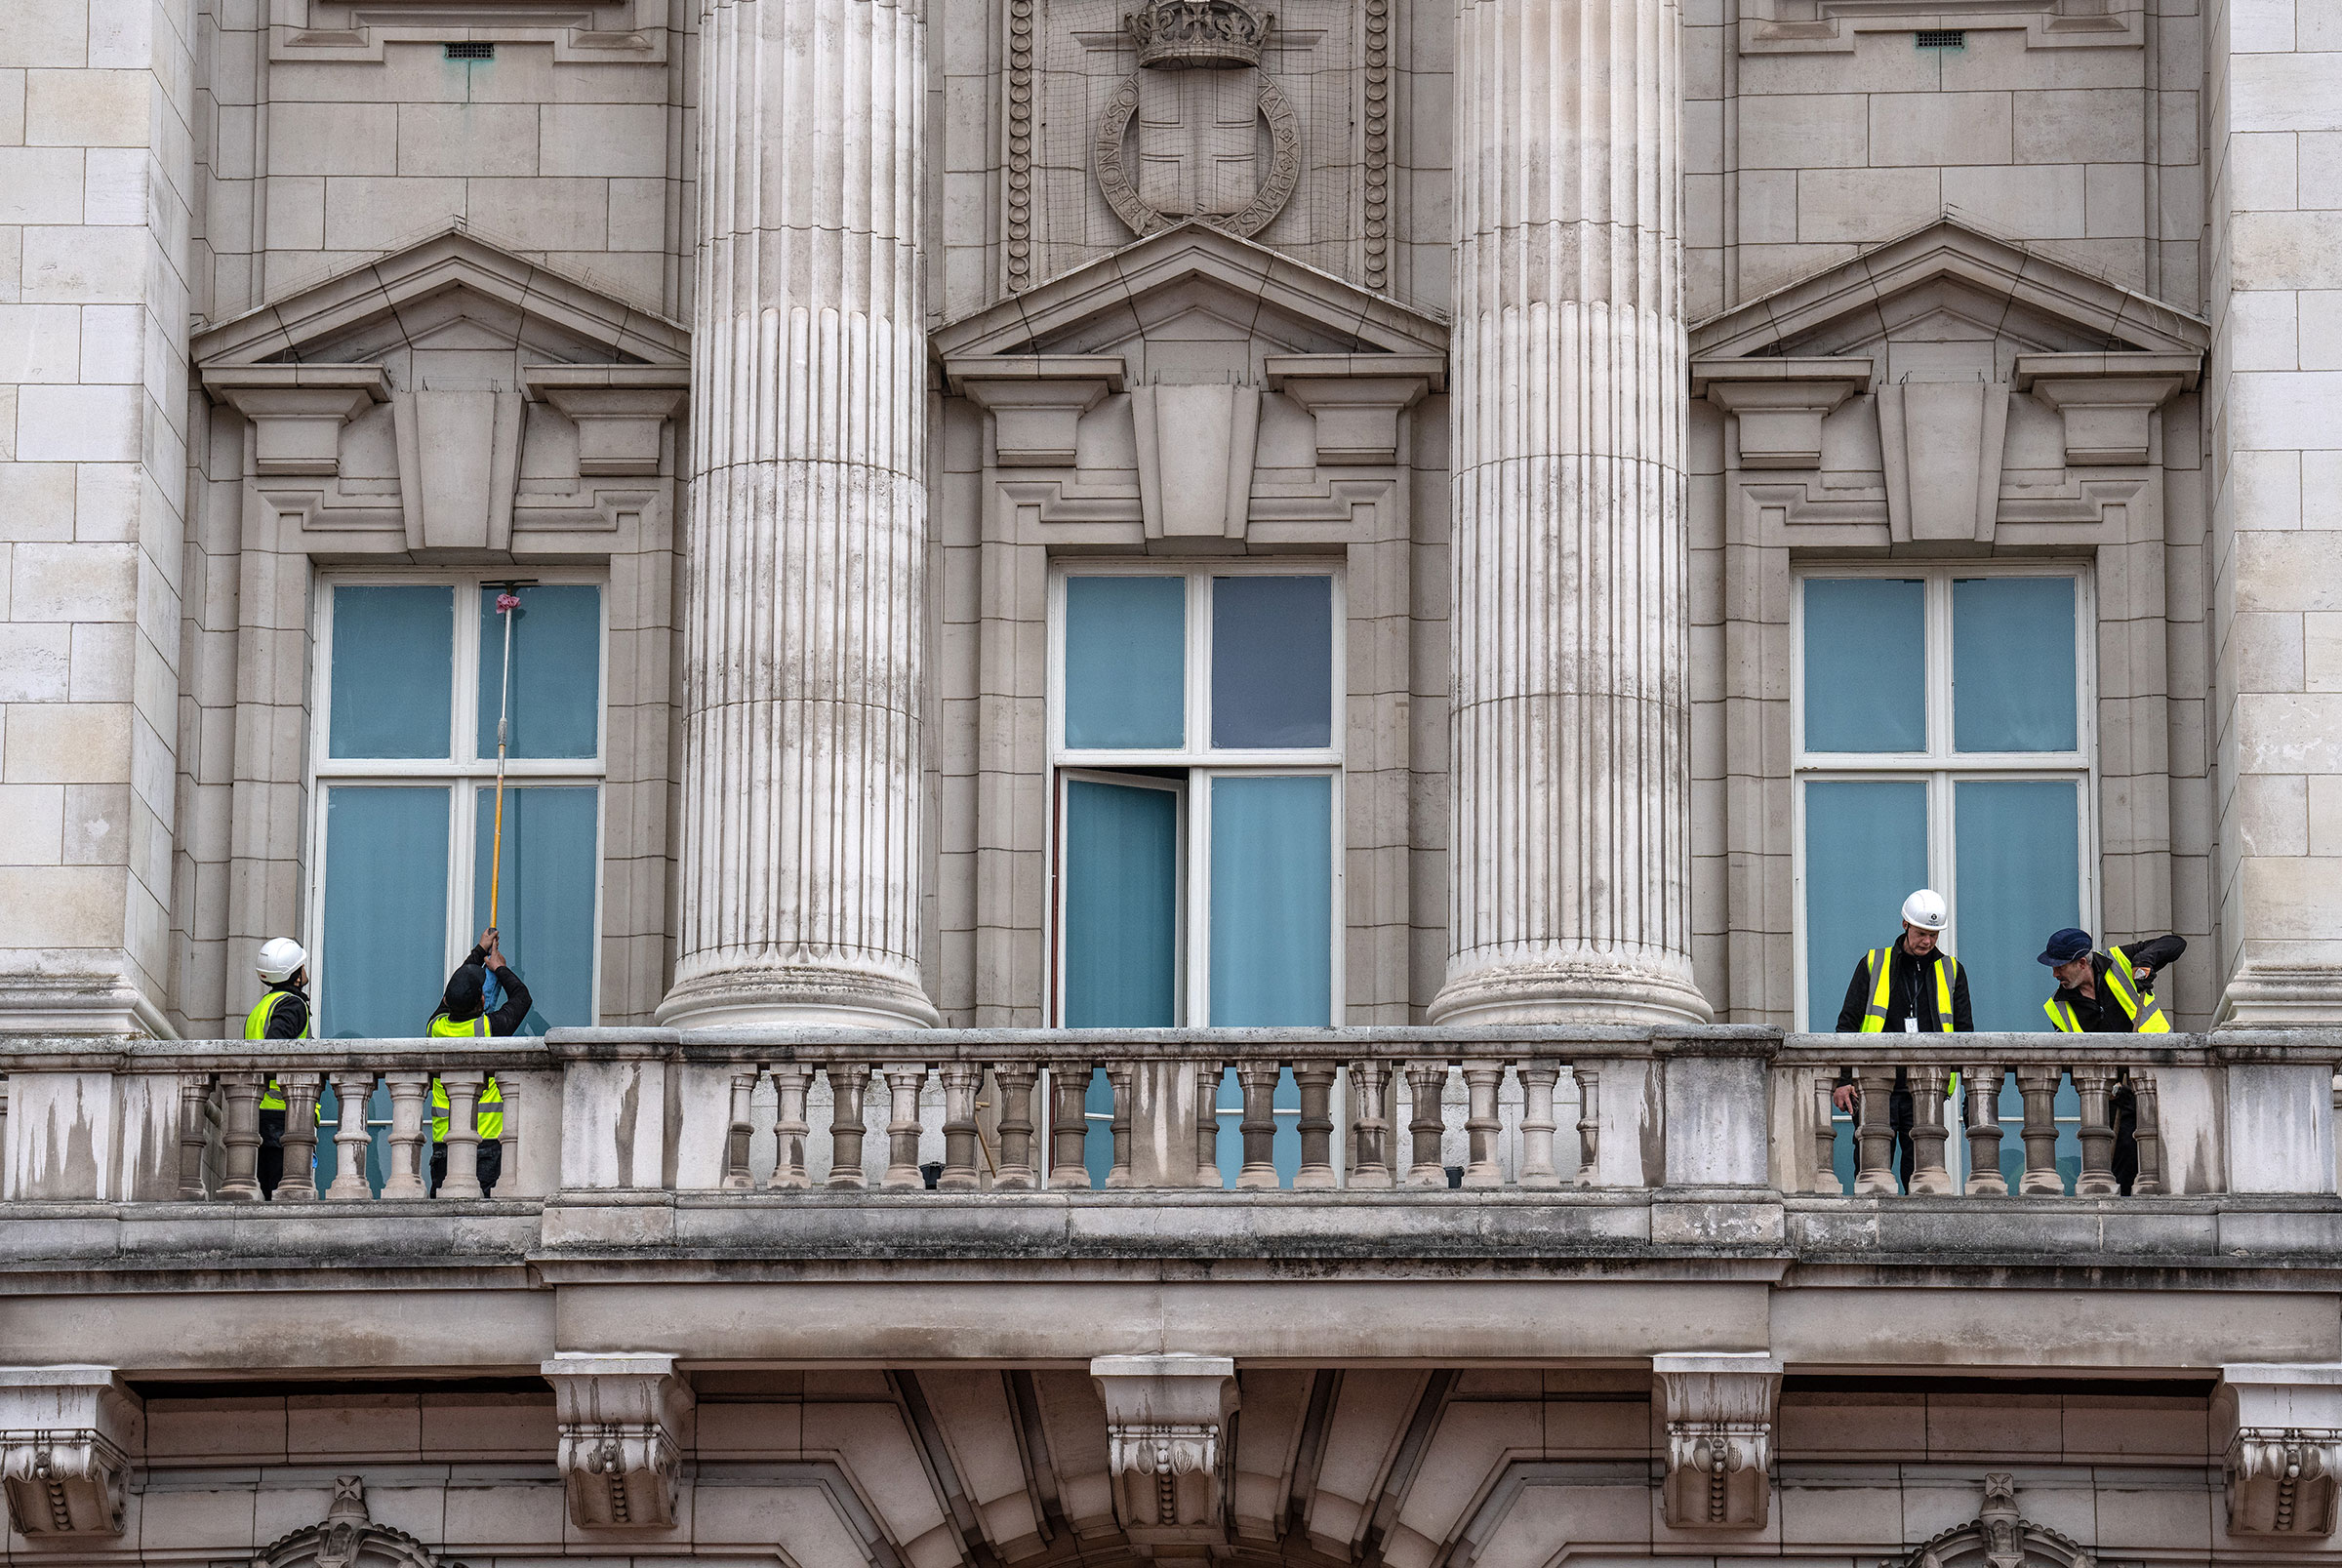 A window is cleaned on the balcony of Buckingham Palace on April 18, 2023. (Carl Court—Getty Images)